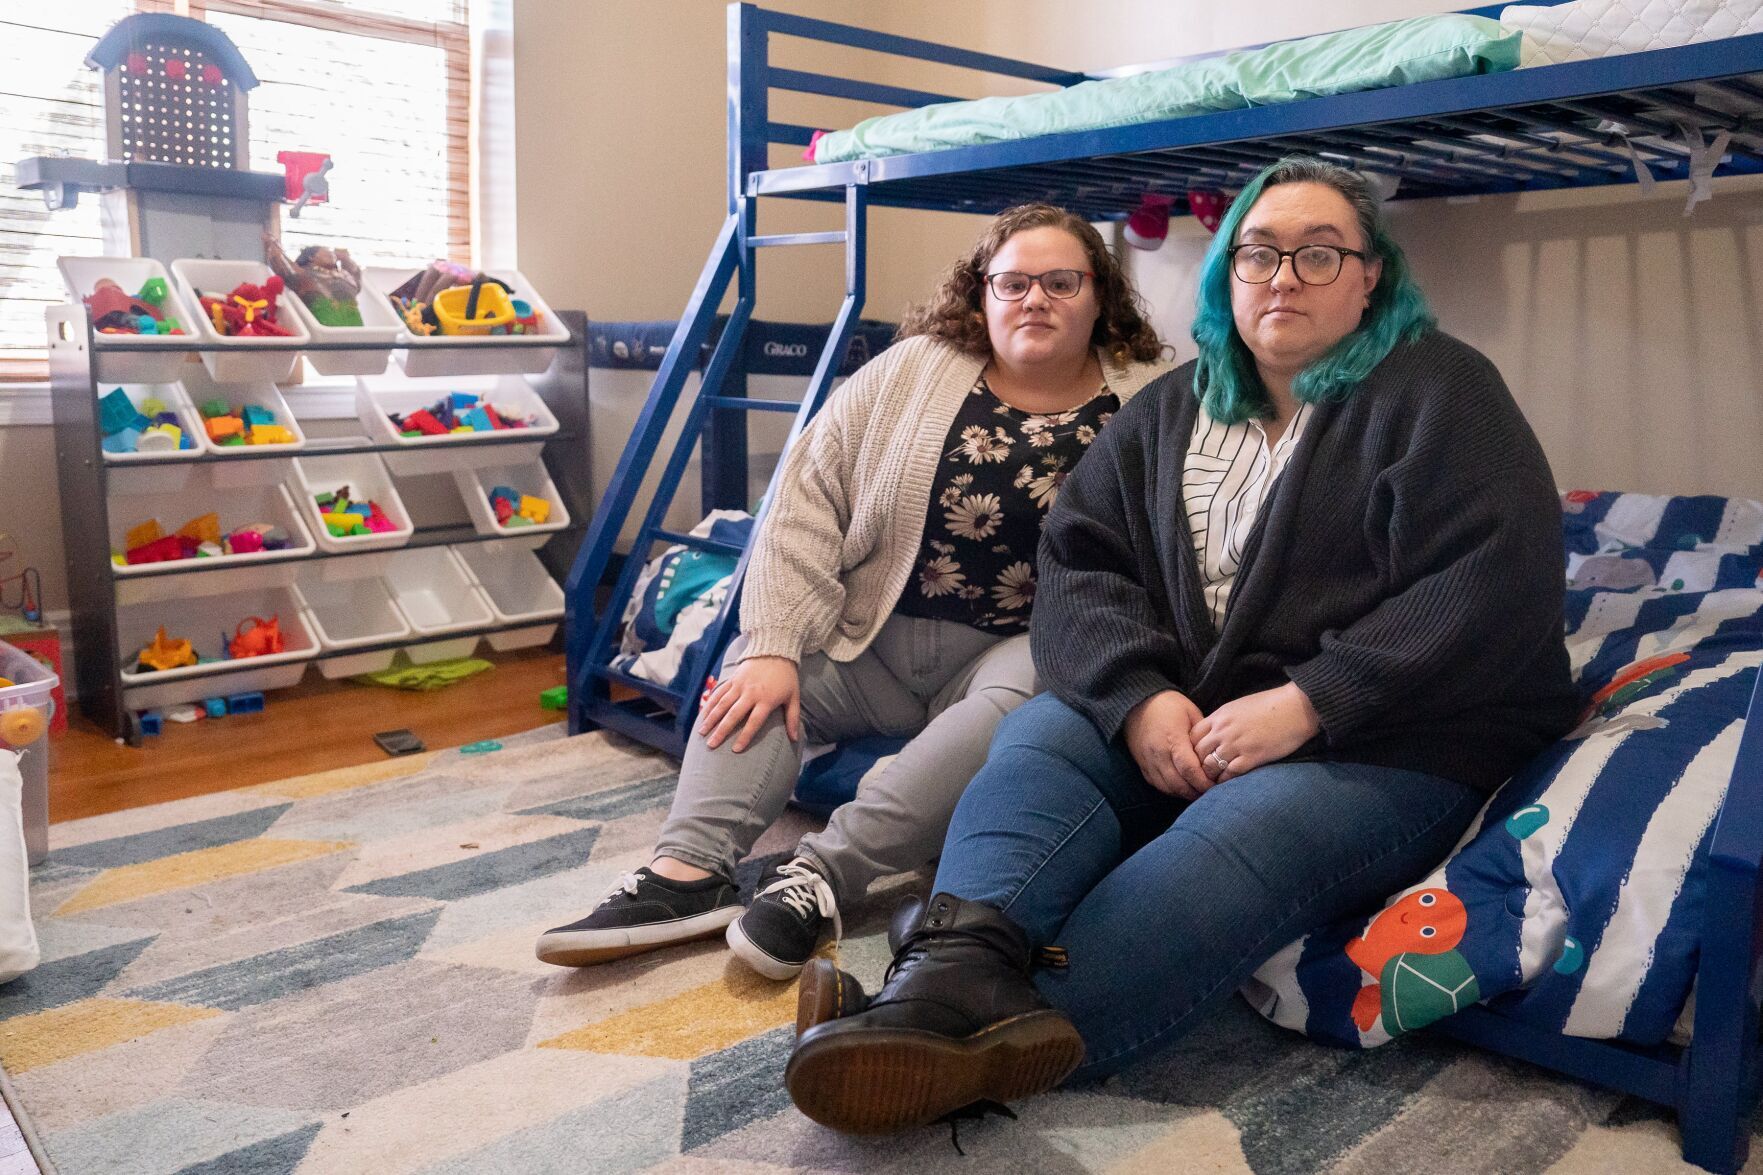 Same-sex couple fights to get Jefferson County foster children returned to their home